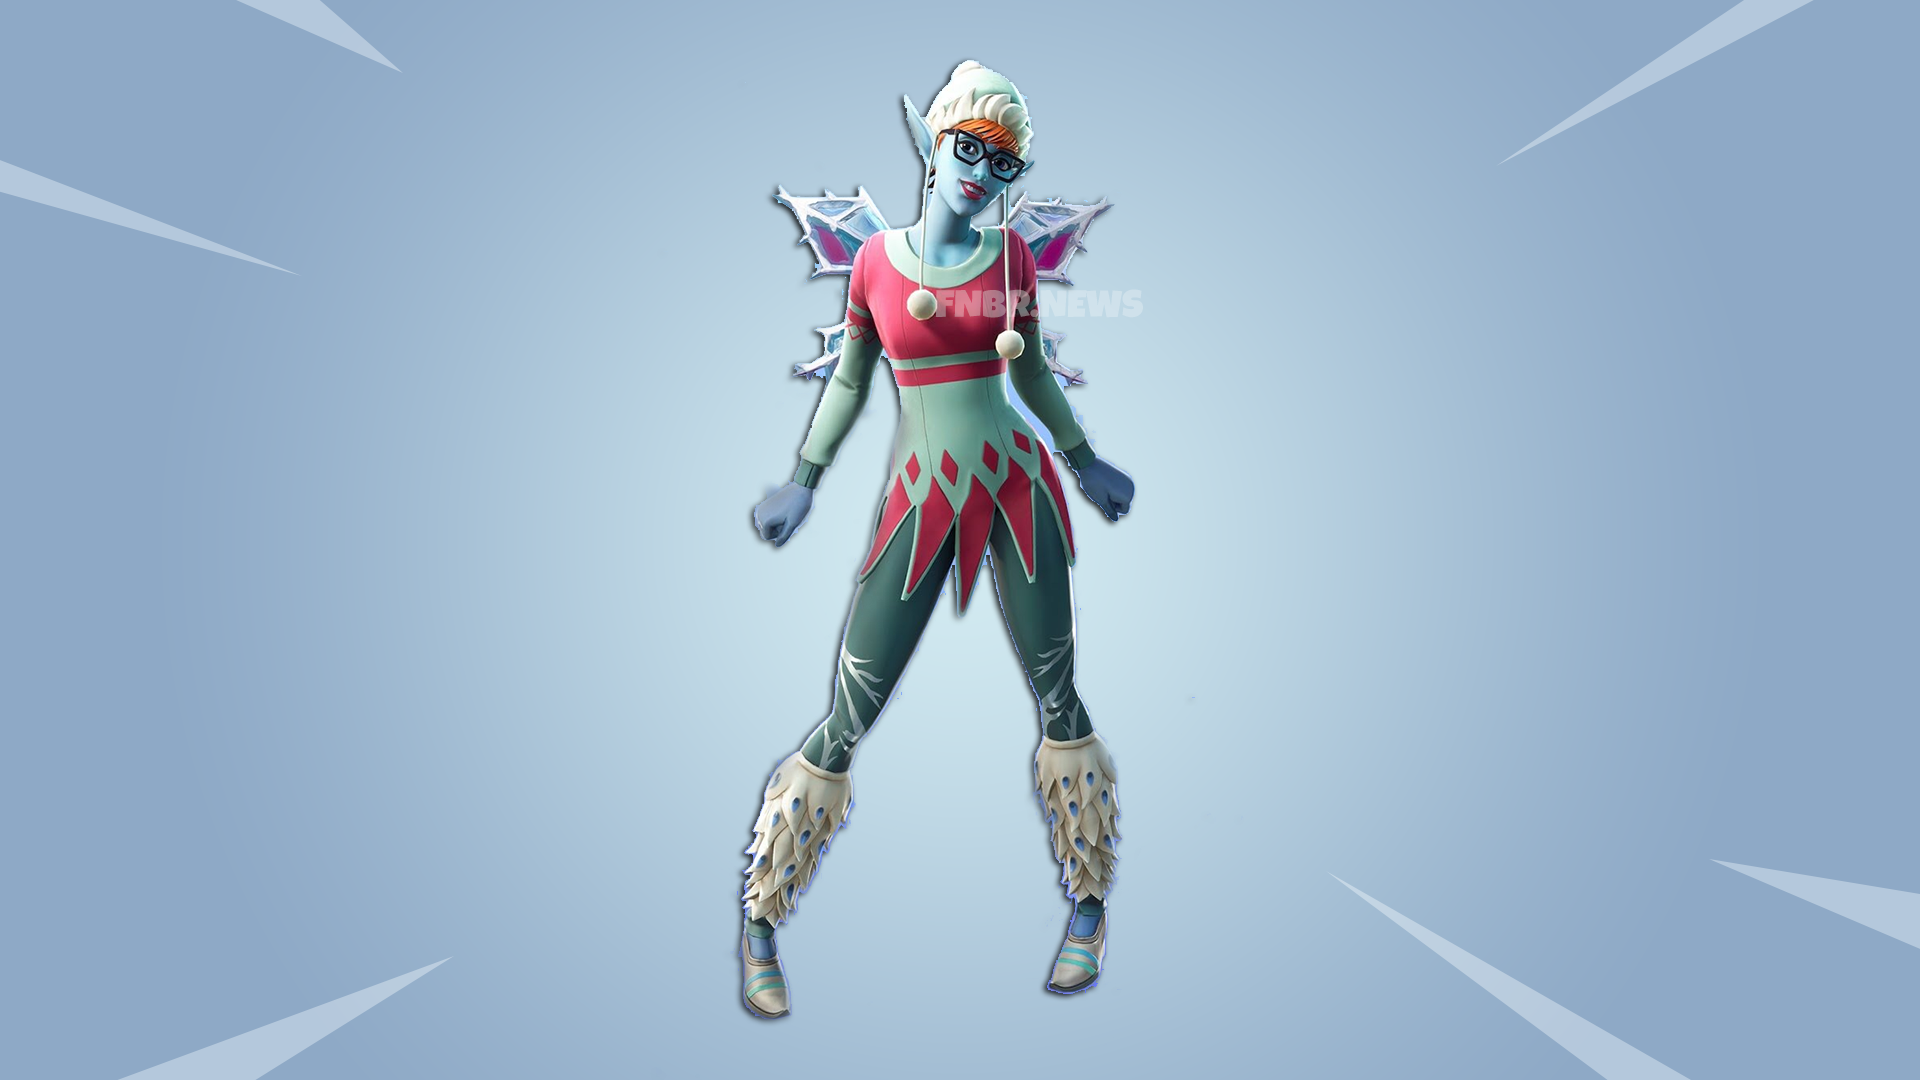 Leak: Upcoming Christmas Cosmetic Leaked by Fortnite ... - 1920 x 1080 png 632kB